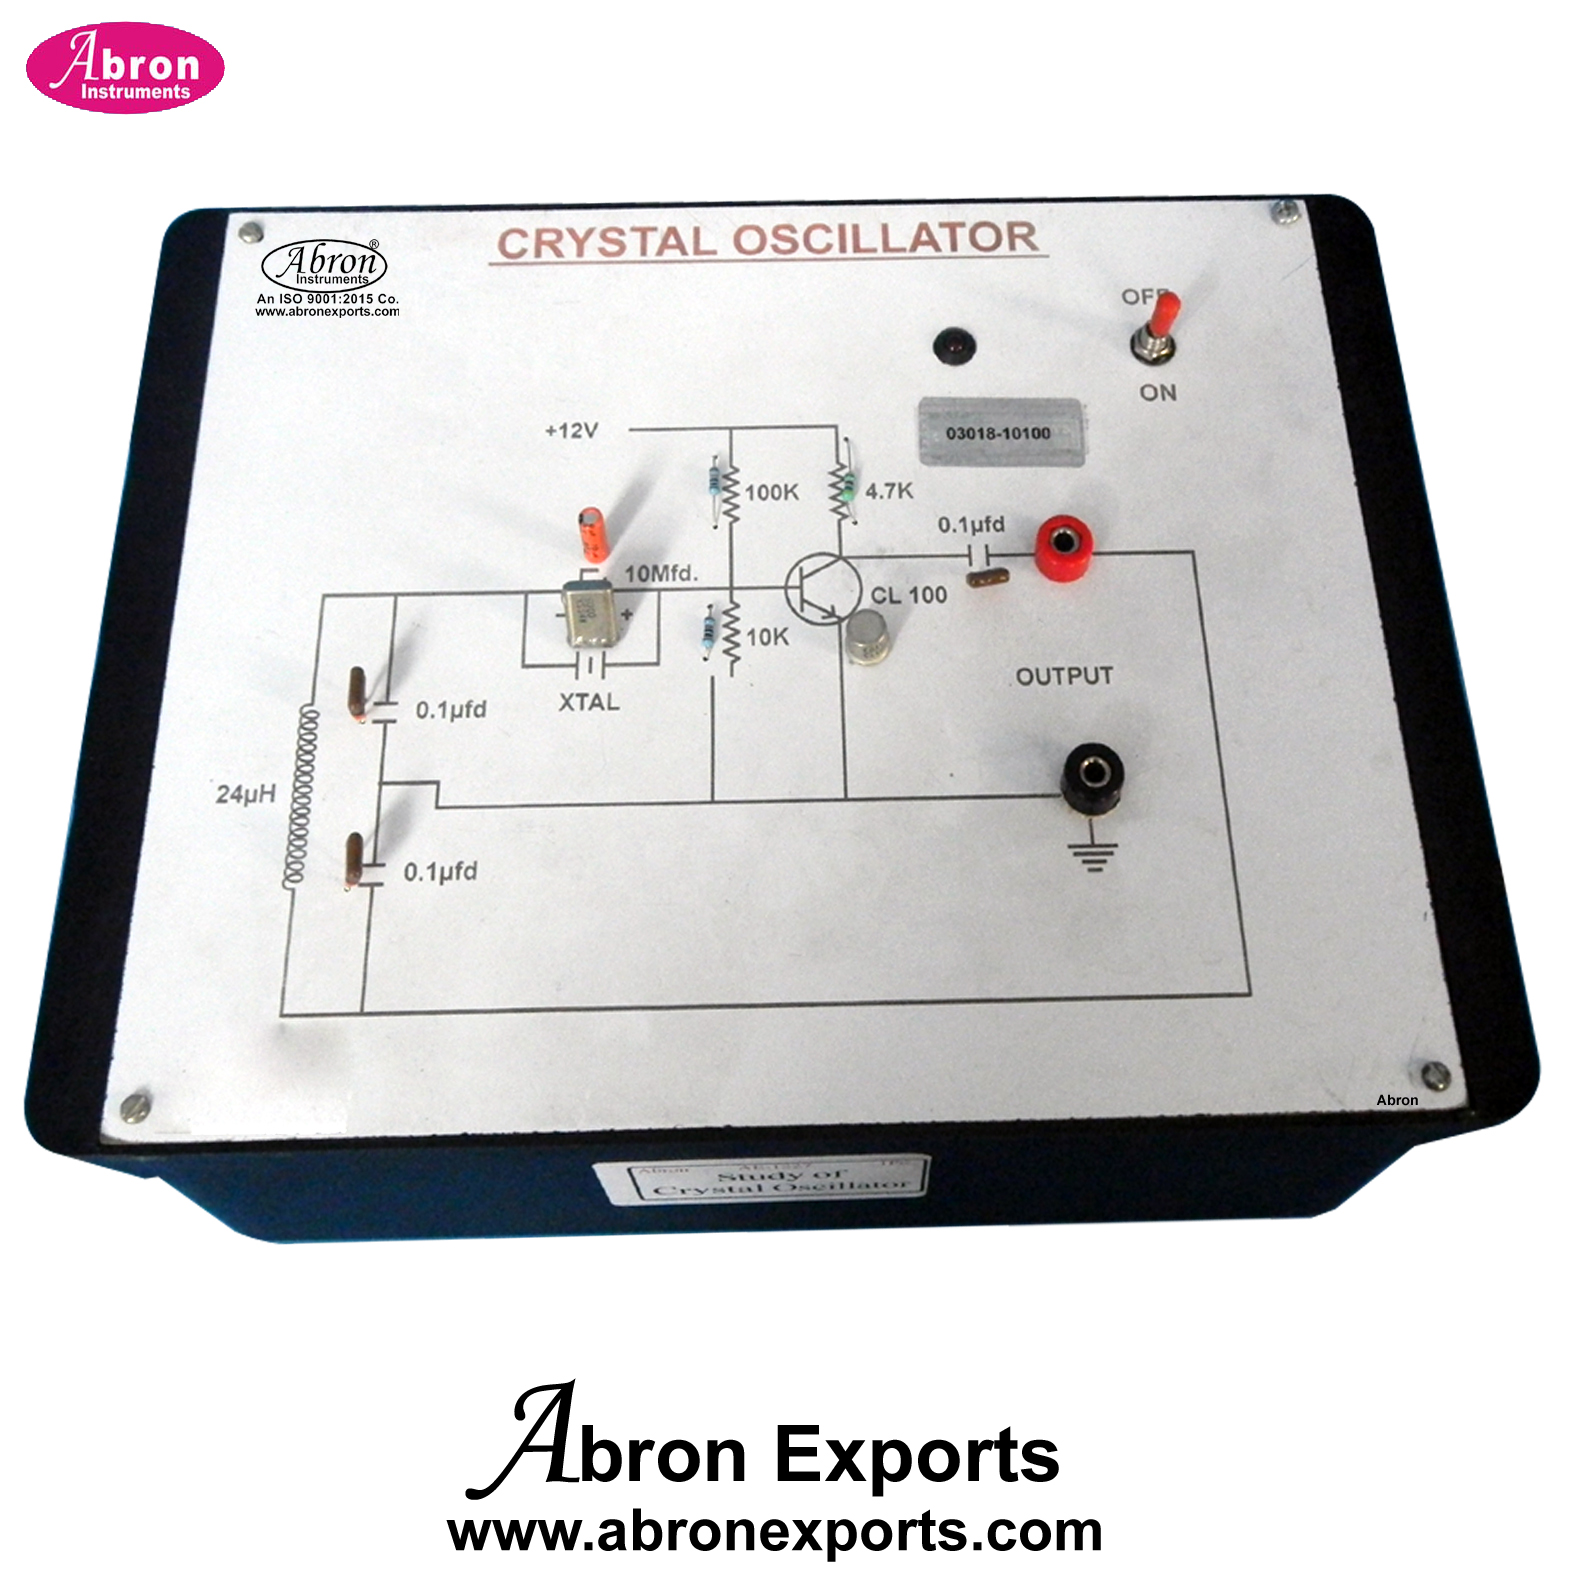 Crystal Oscillator to Study With Output for CRO Sockets Circuit Power Supply in Box Abron AE-1227A 